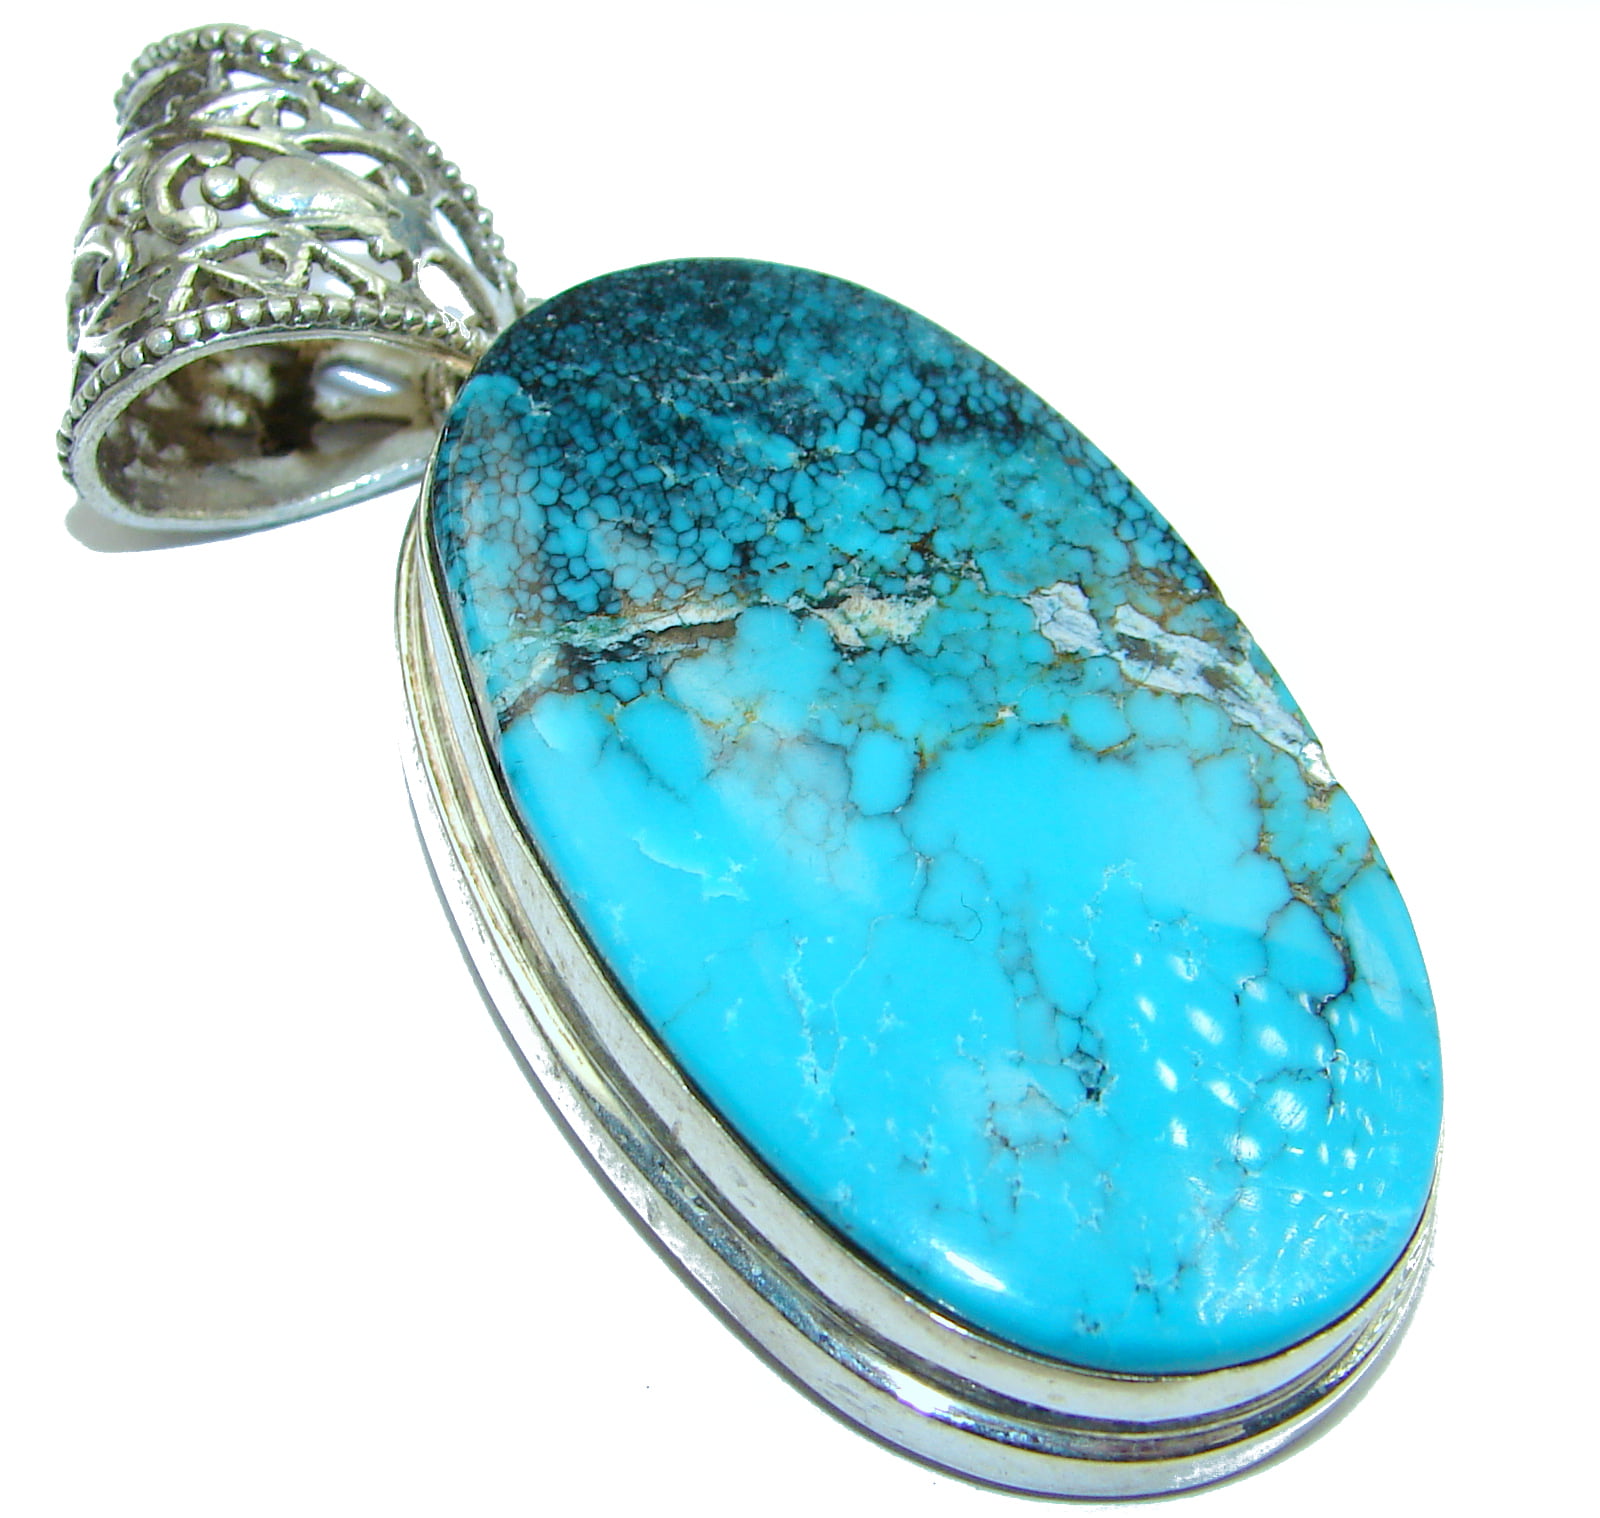 Southwestern Abstract Pendant with Large Bail Turquoise-like Natural Stone